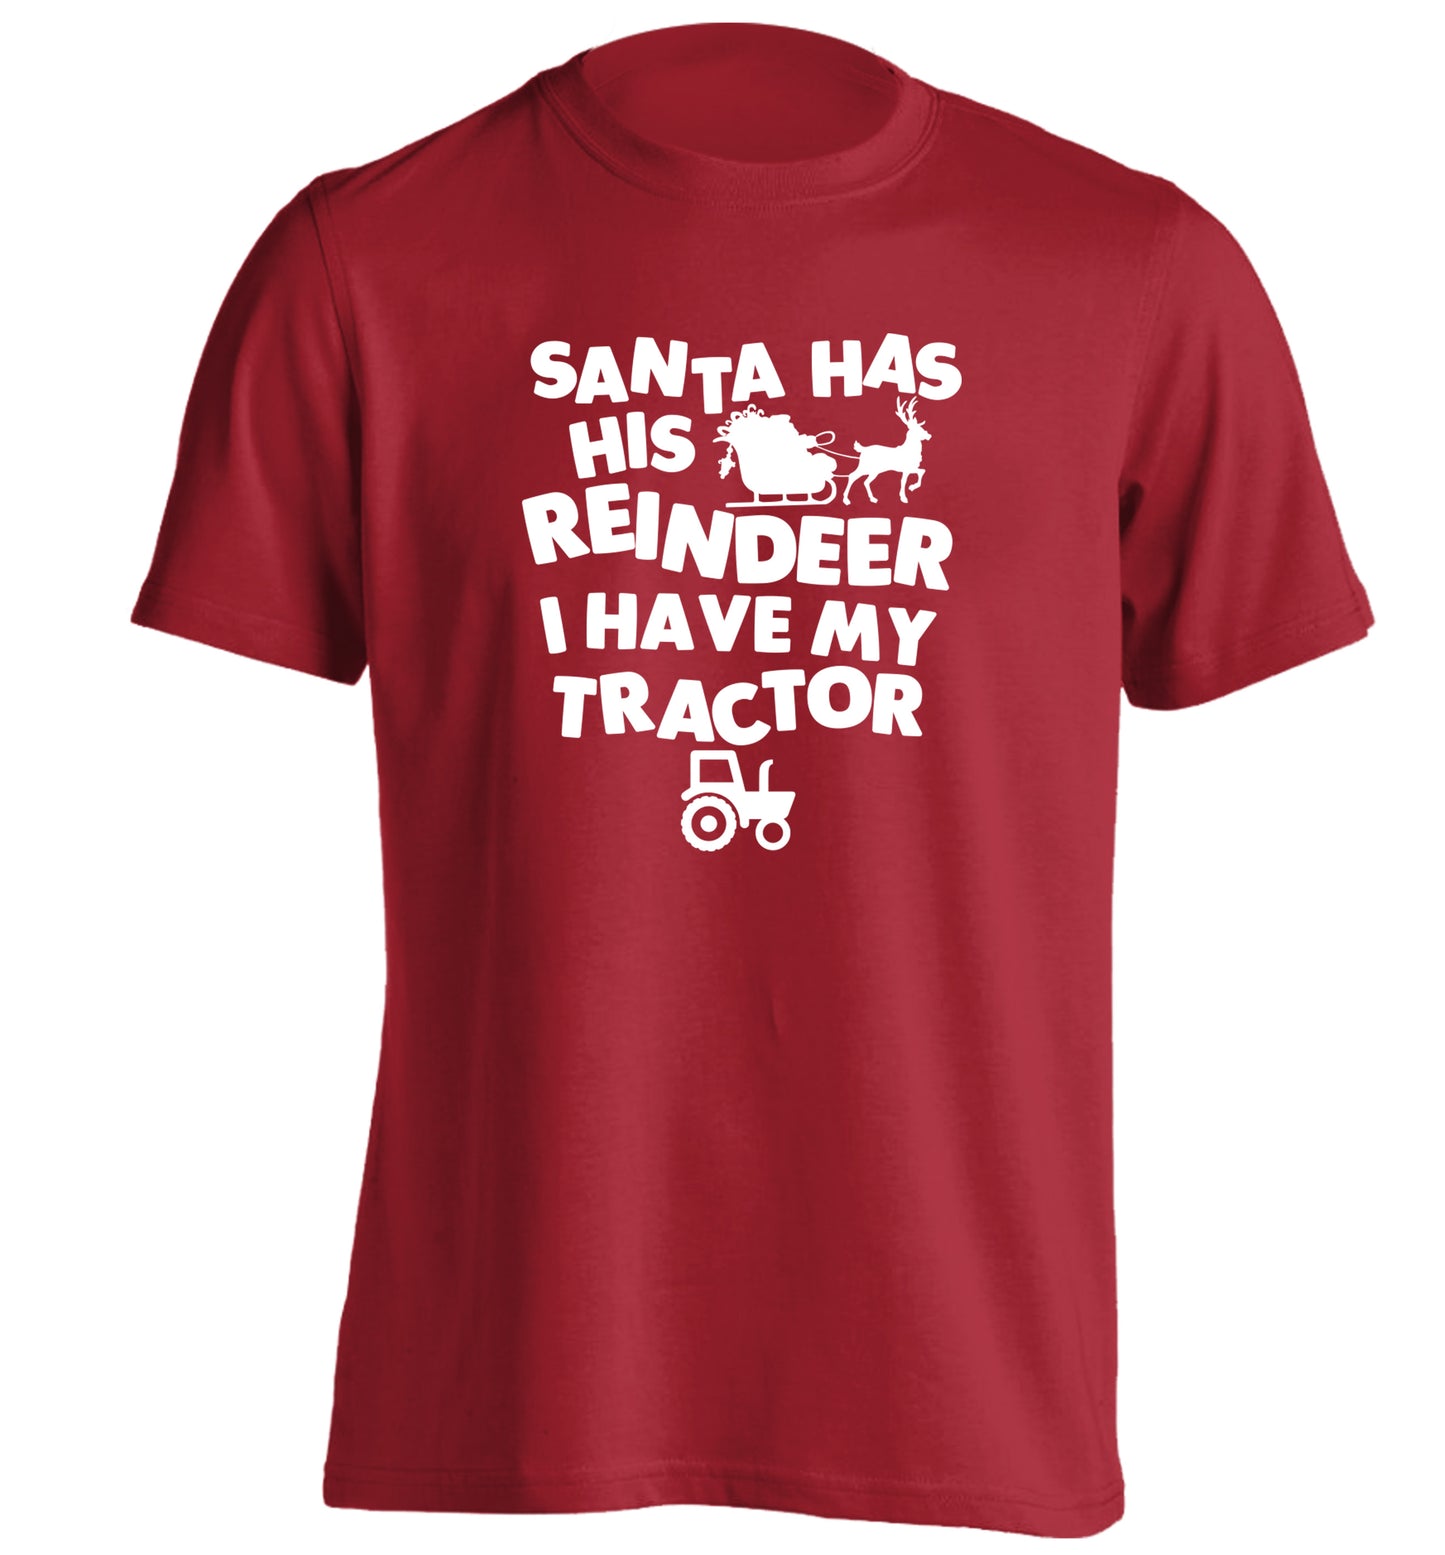 Santa has his reindeer I have my tractor adults unisex red Tshirt 2XL